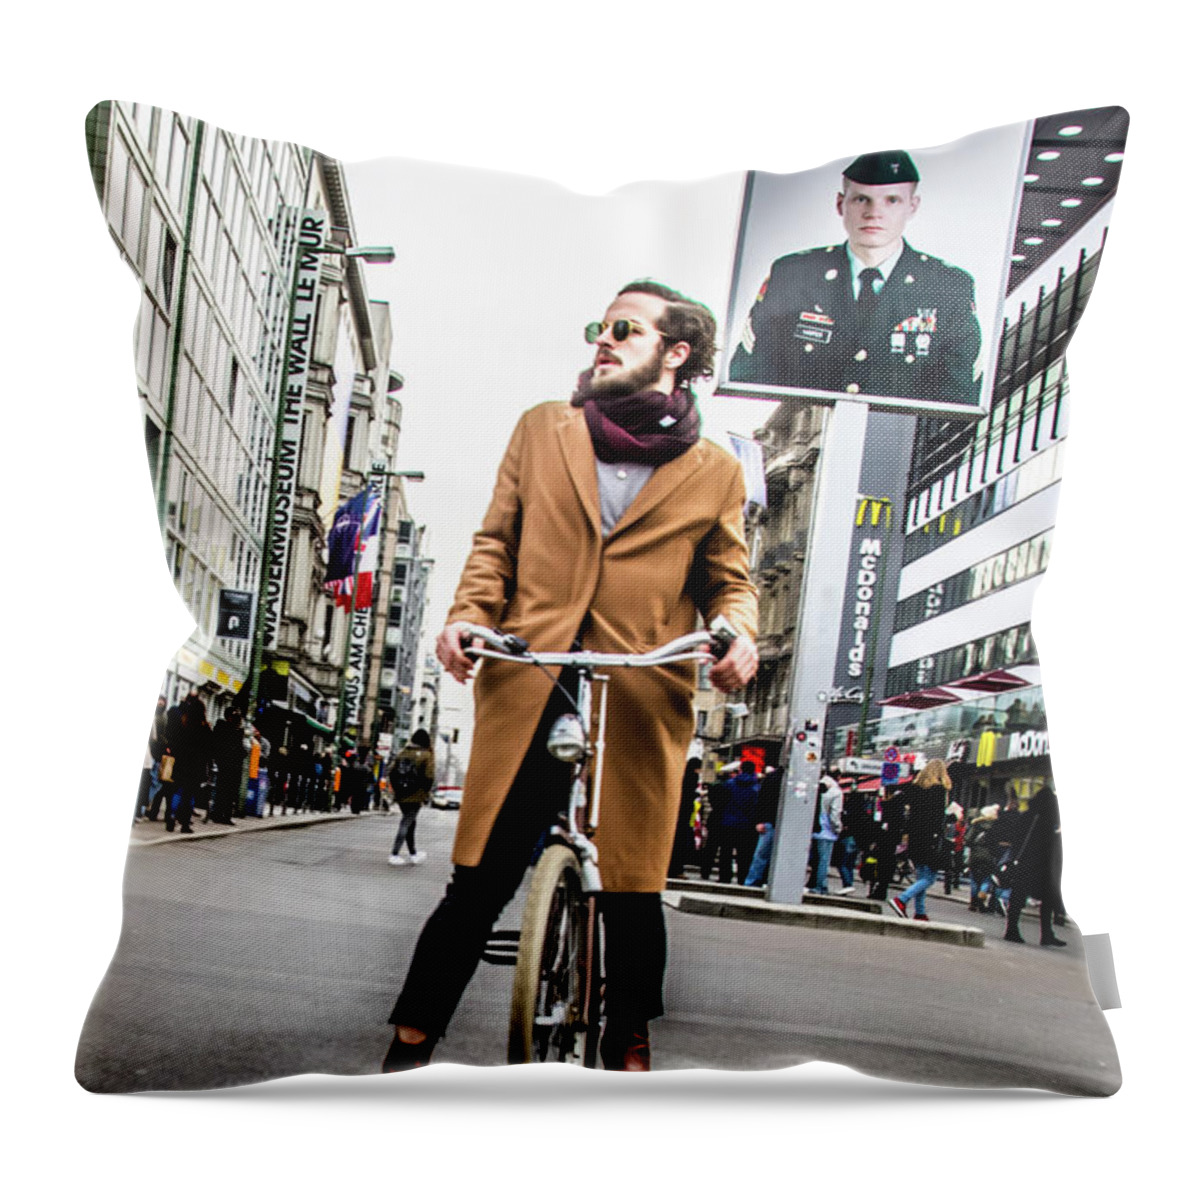 Berlin Throw Pillow featuring the photograph Berlin Hipster on BIcycle at Checkpoint Charlie by Tito Slack